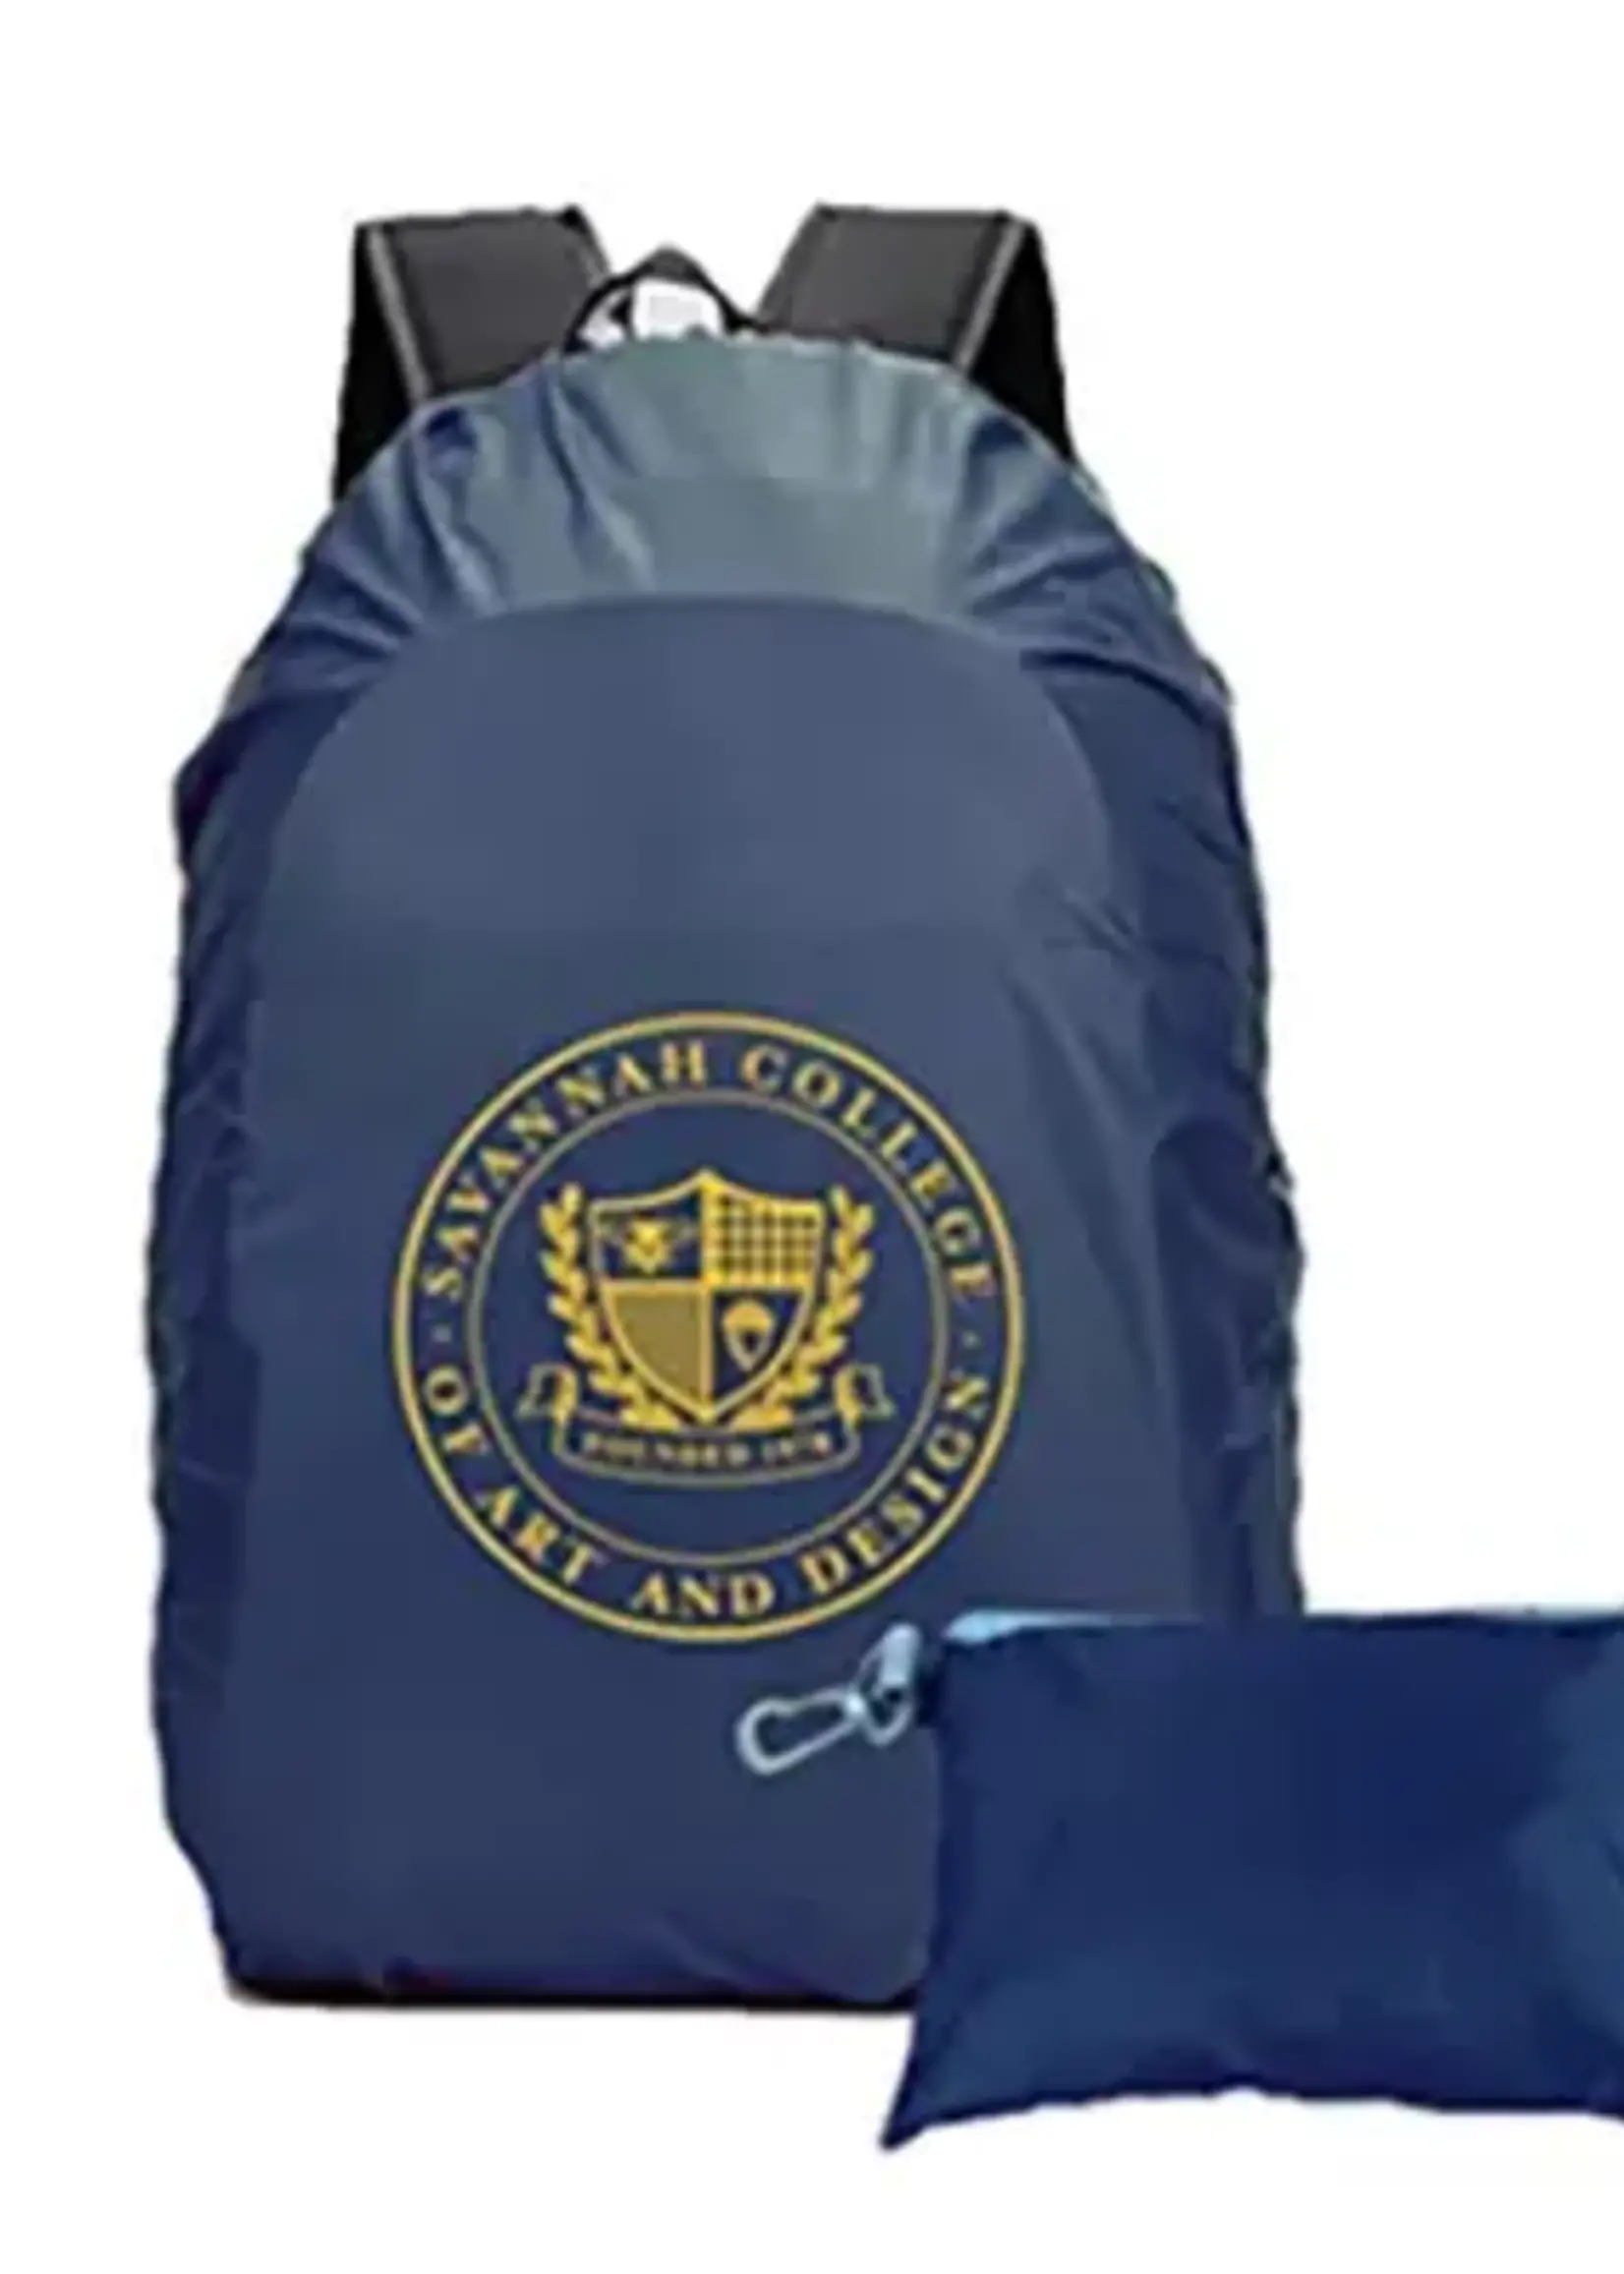 SCAD SCAD Crest Water Resistant Backpack Cover Navy